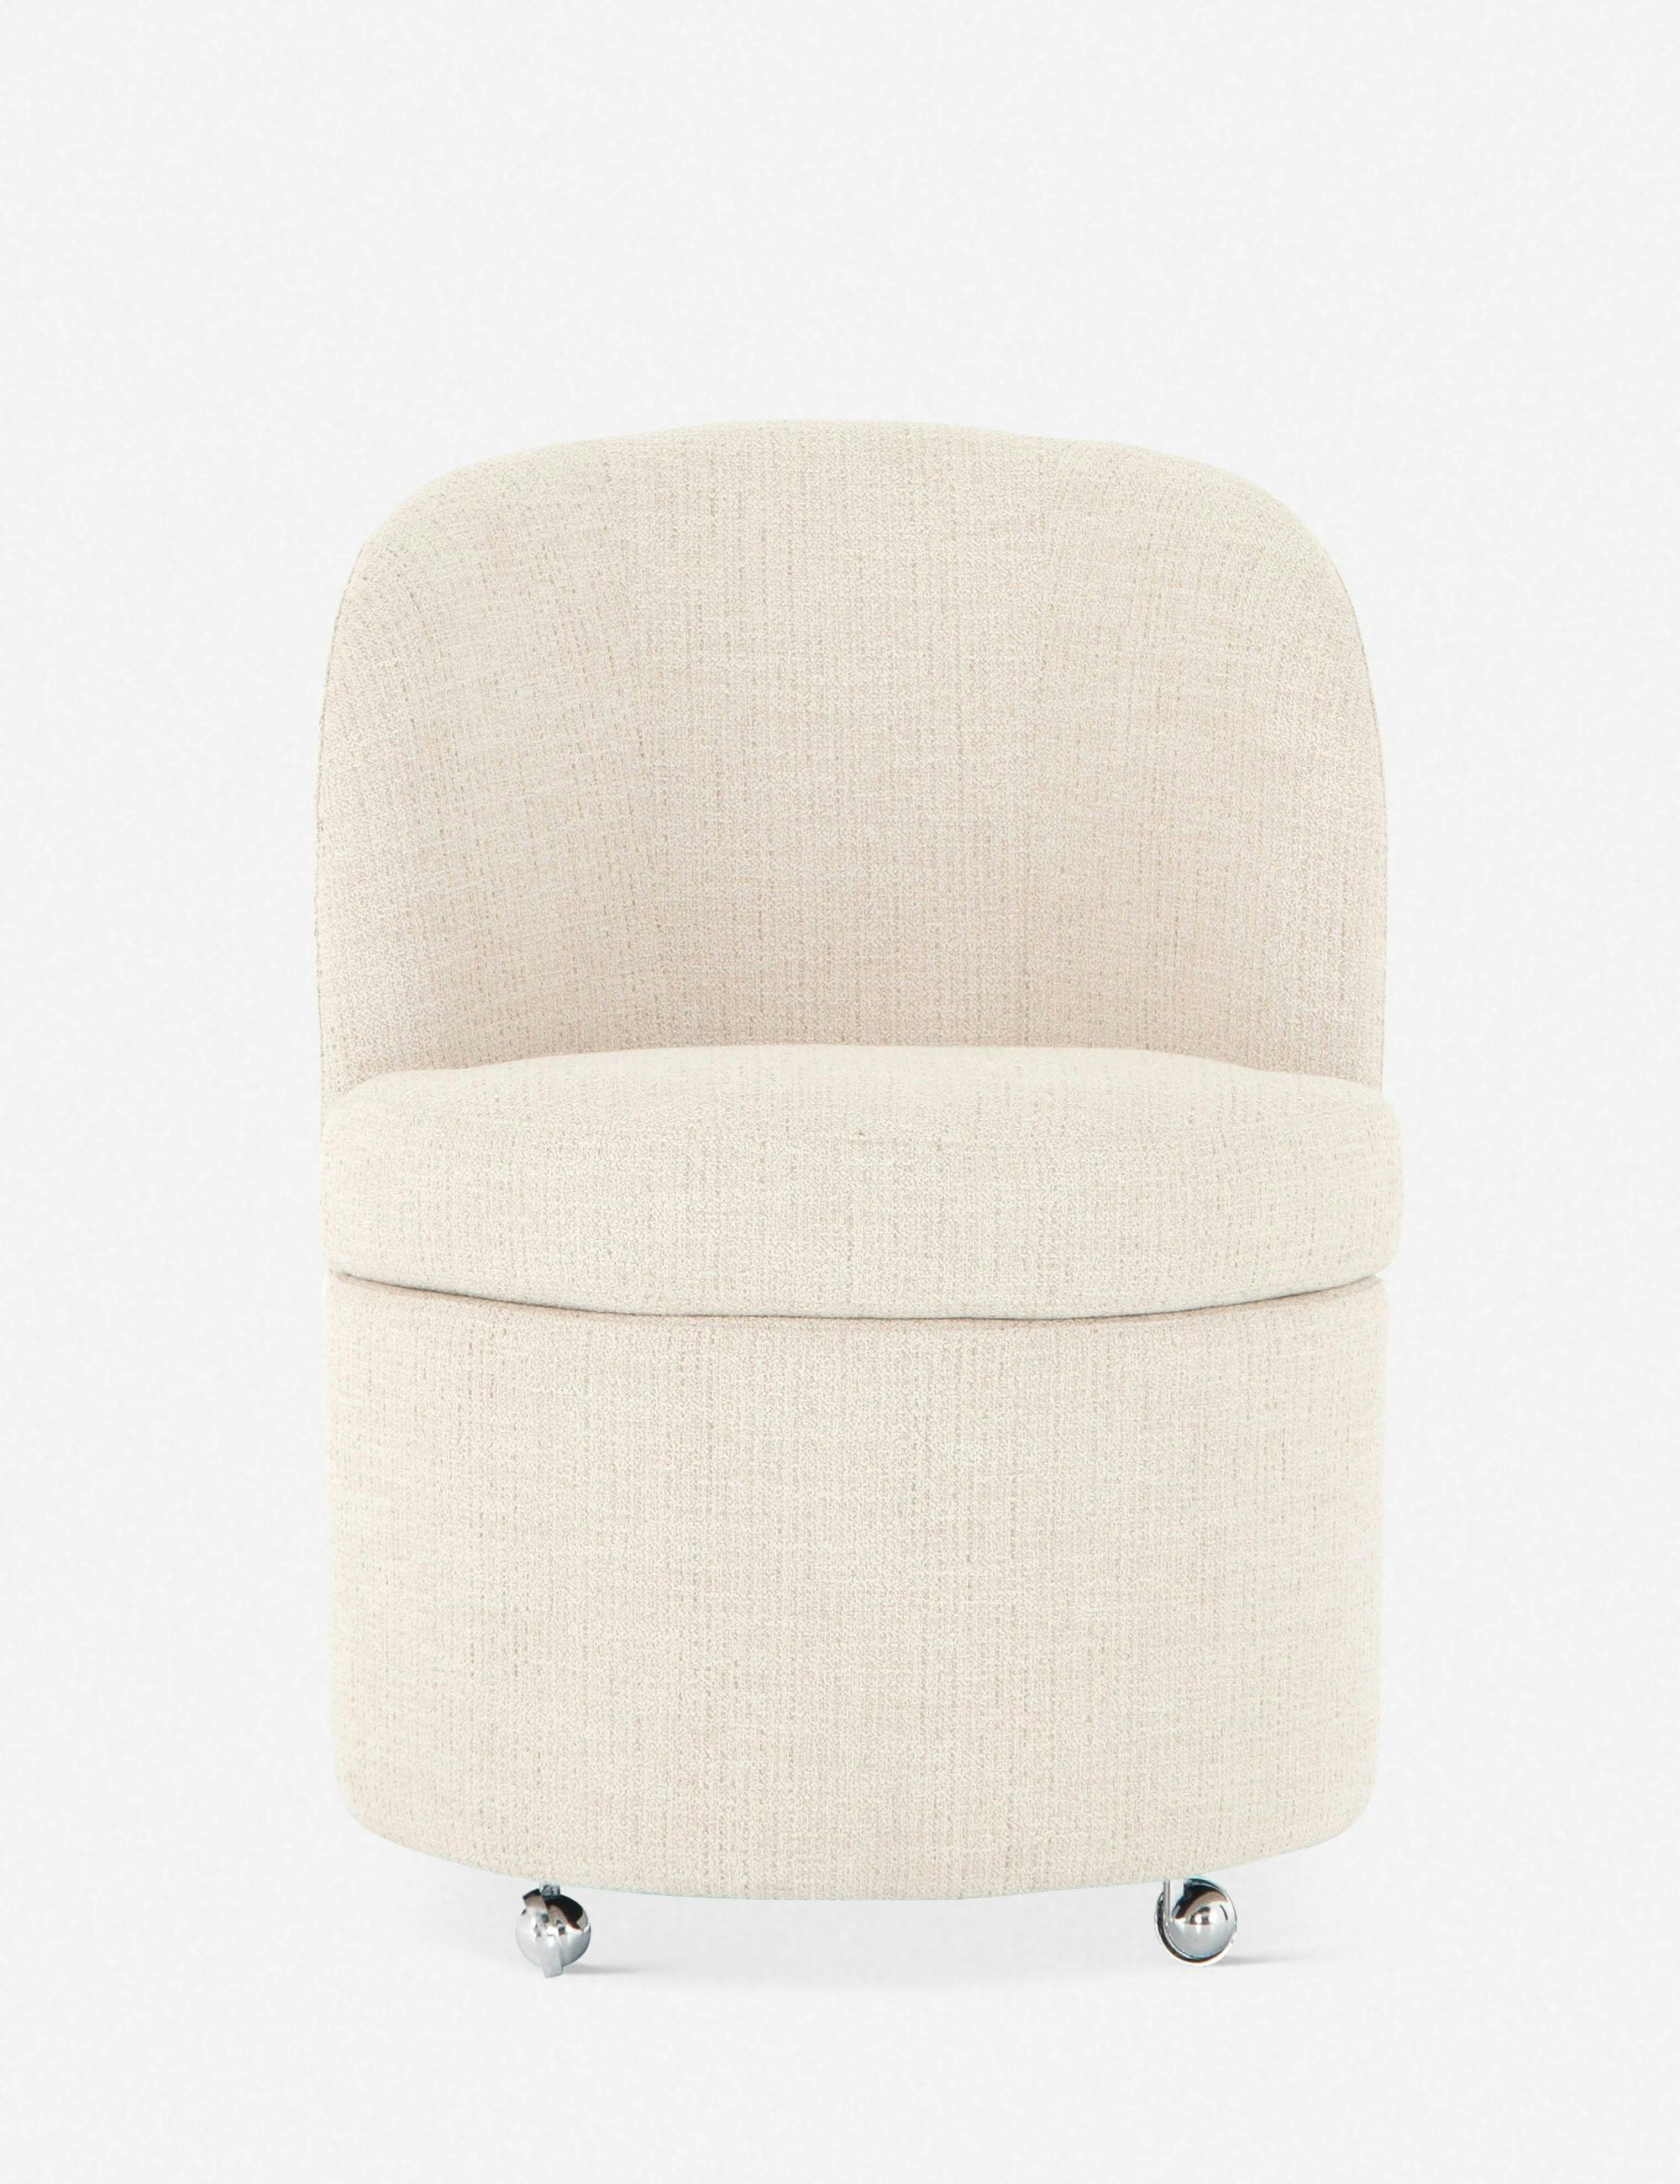 Hampton Cream Upholstered Parsons Side Chair with Chrome Casters